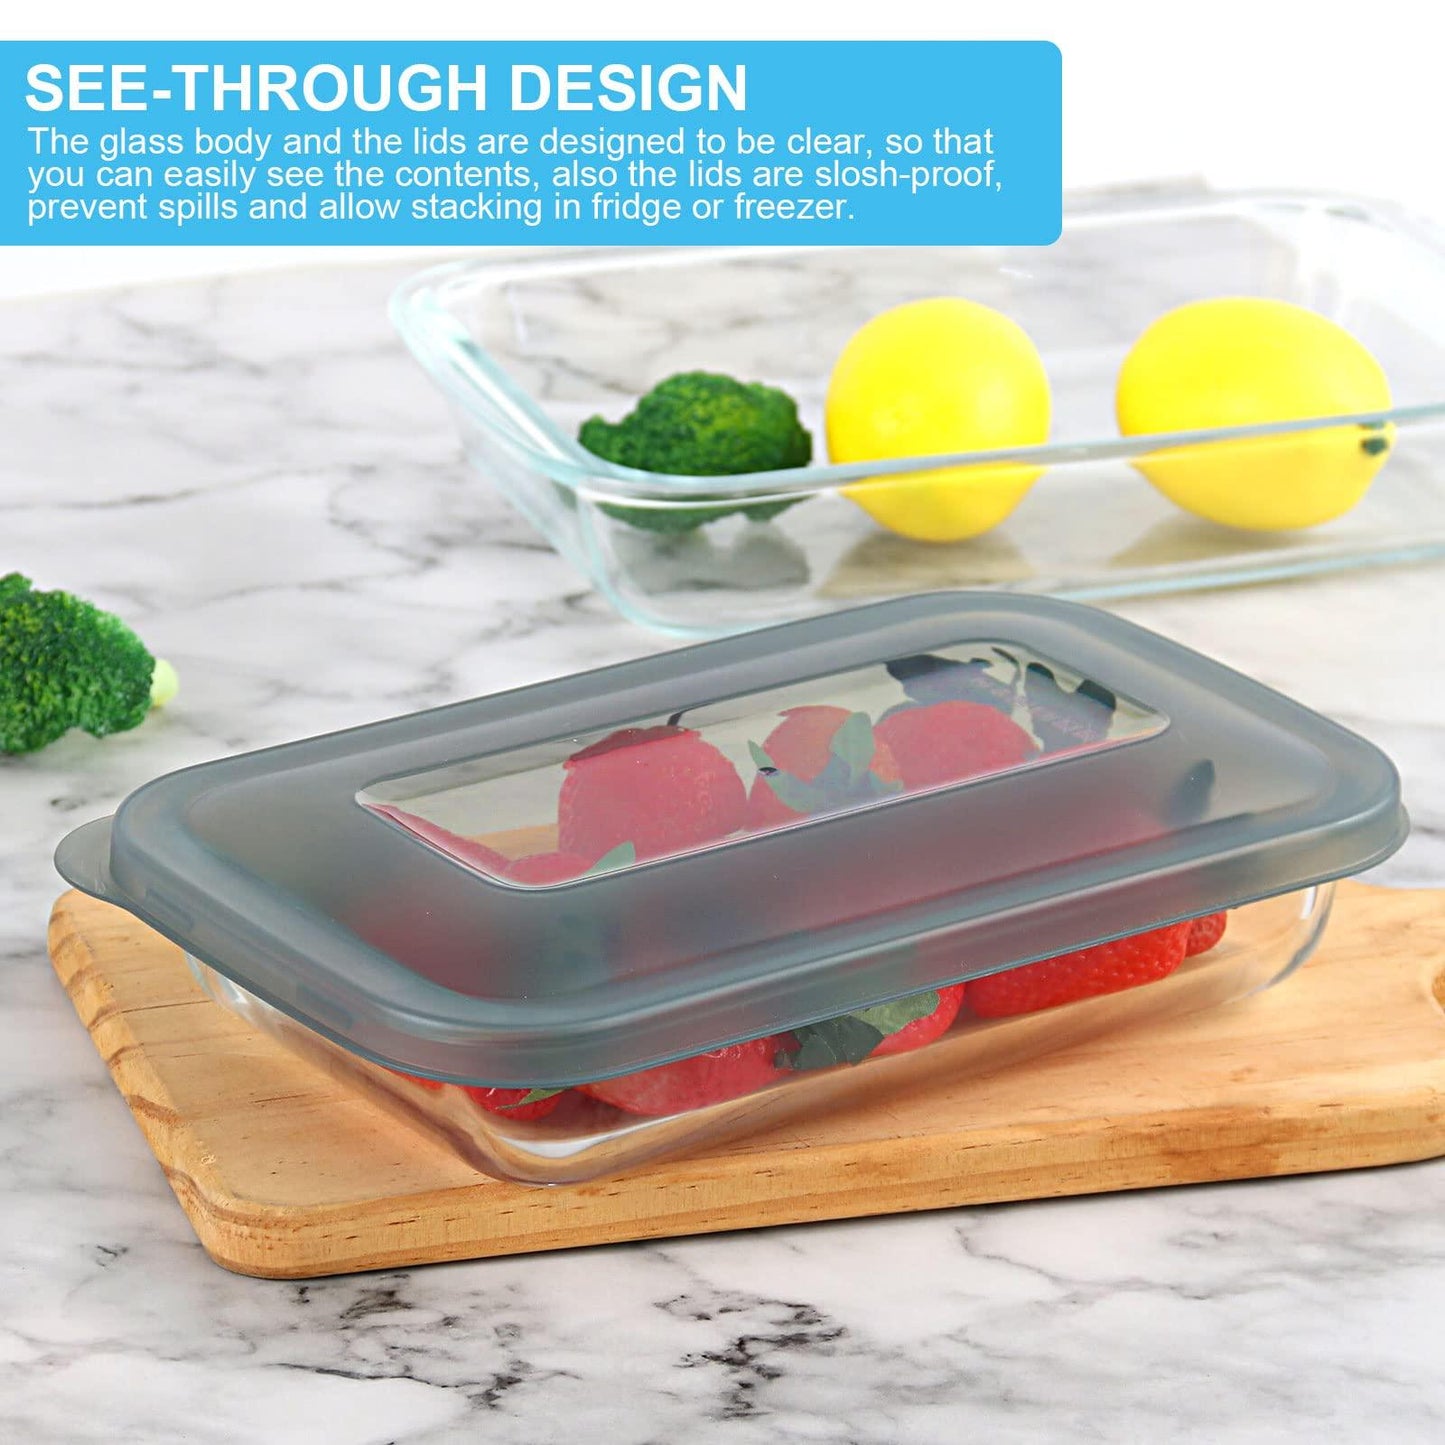 KOMUEE 8 Pieces Glass Baking Dish with Lids Rectangular Glass Baking Pan Bakeware Set with BPA Free Lids, Baking Pans for Lasagna, Leftovers, Cooking, Kitchen, Fridge-to-Oven, Gray - CookCave